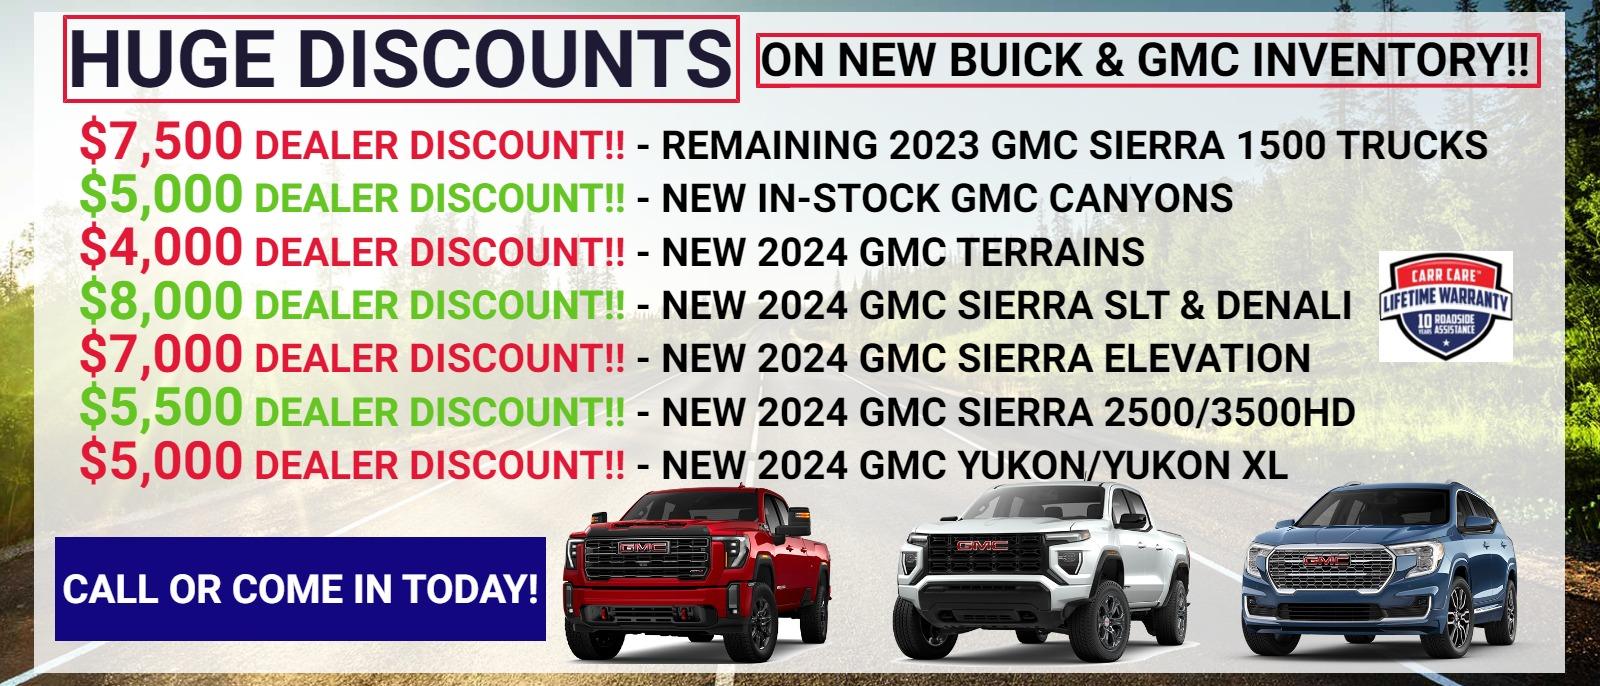 HUGE DISCOUNTS ON NEW BUICK & GMC INVENTORY AT CARR BUICK GMC IN VANCOUVER, WA